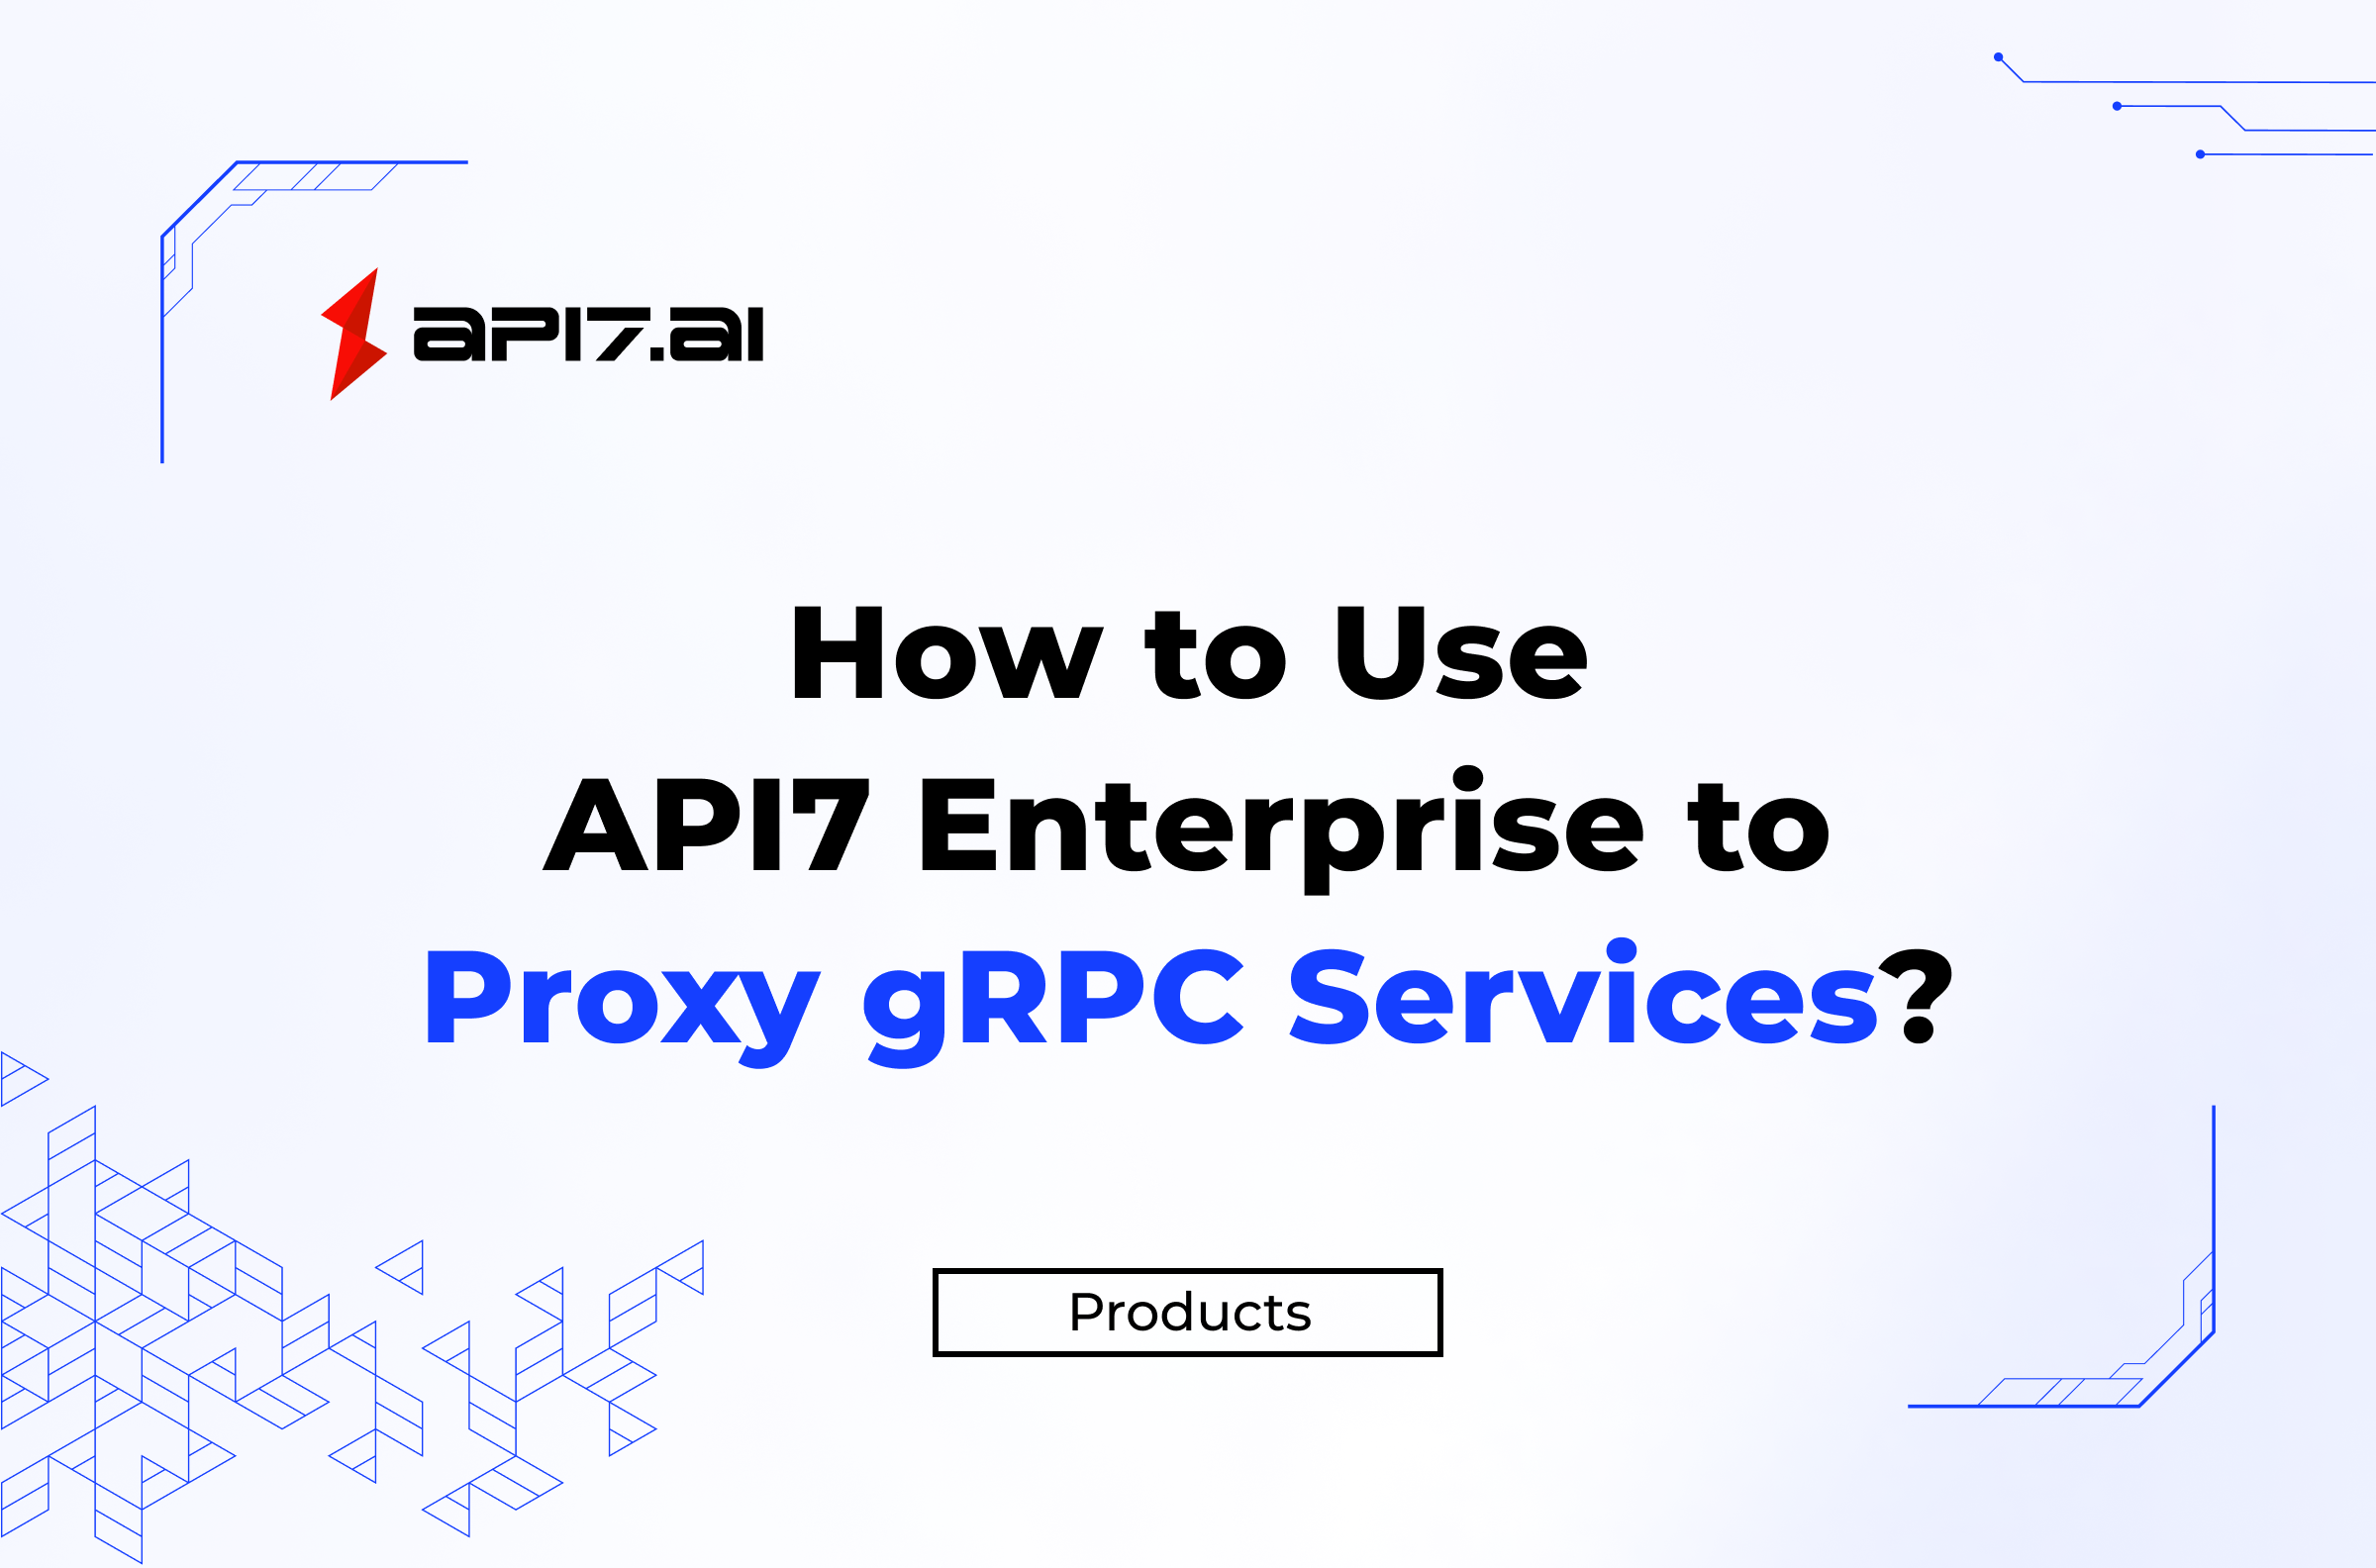 How to Use API7 Enterprise to Proxy gRPC Services?